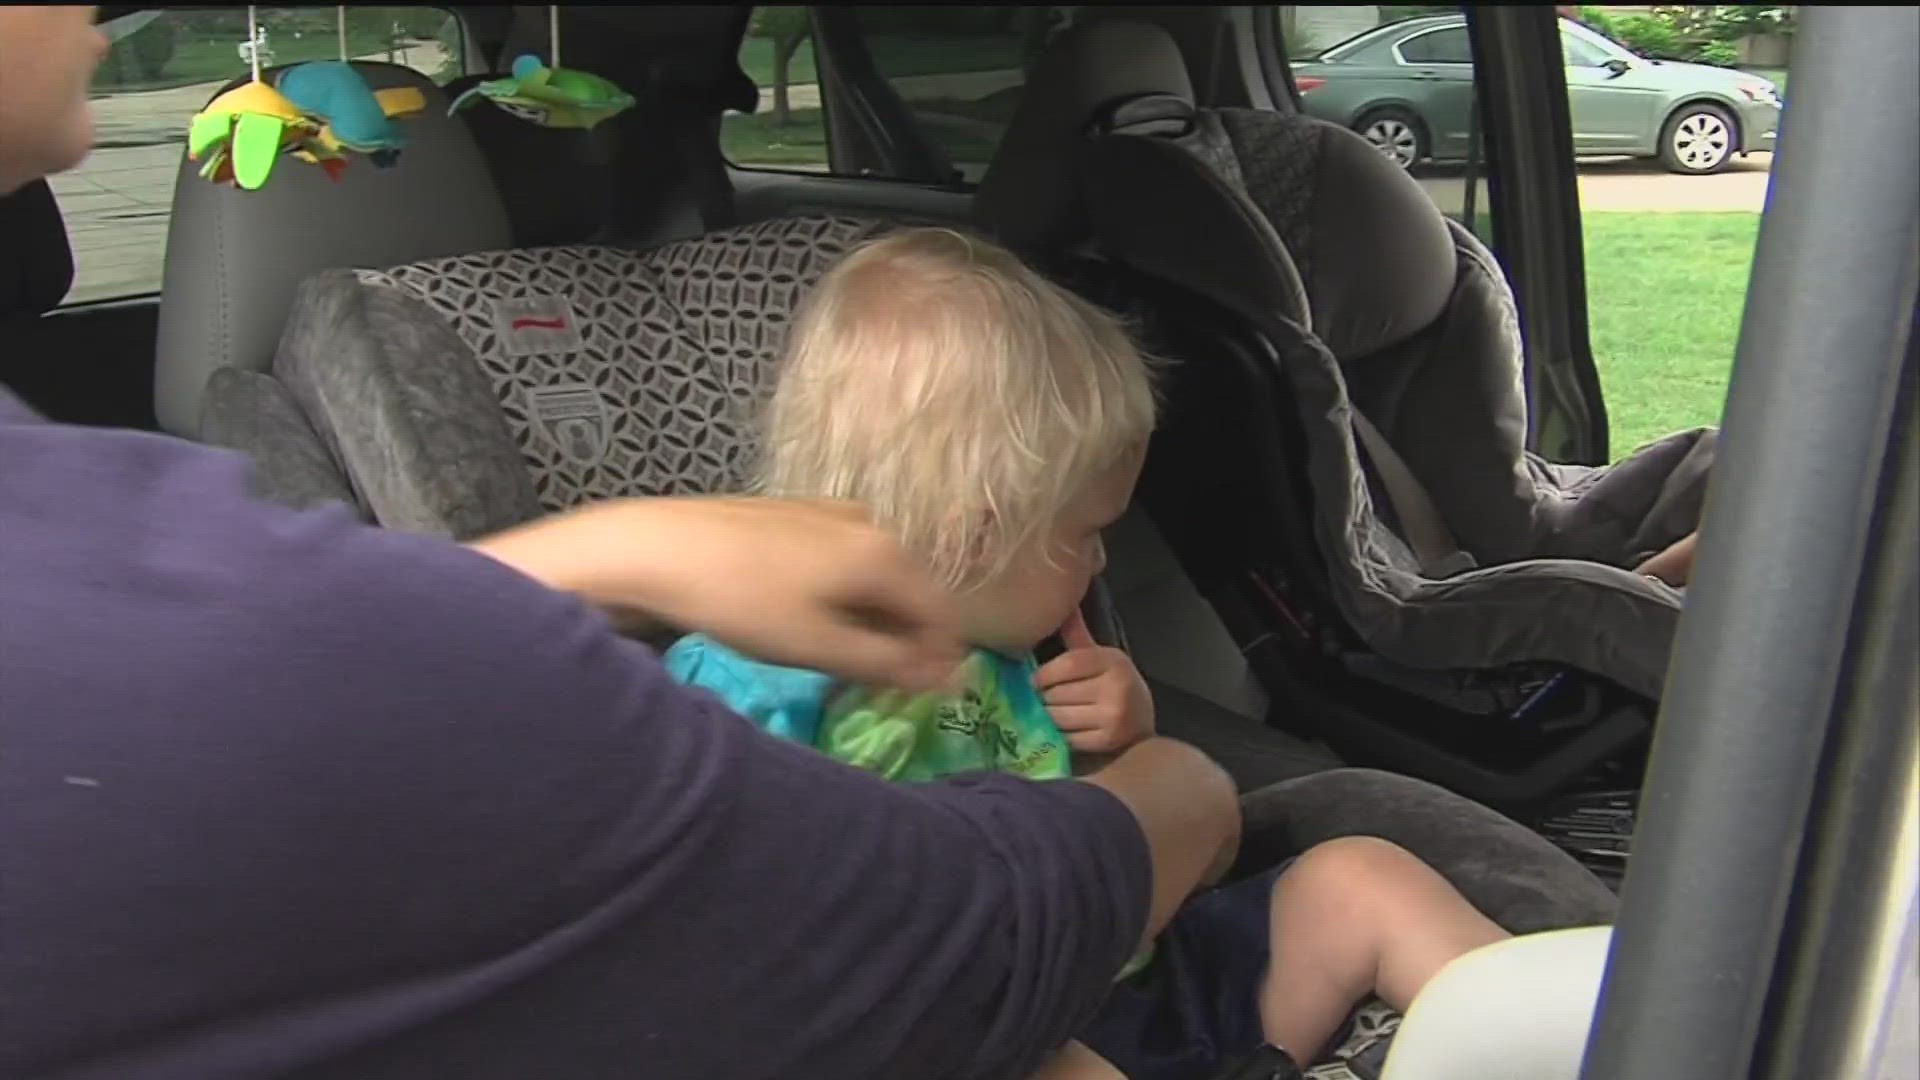 On average, 38 children under the age of 15 die each year from heatstroke from being left in a car.